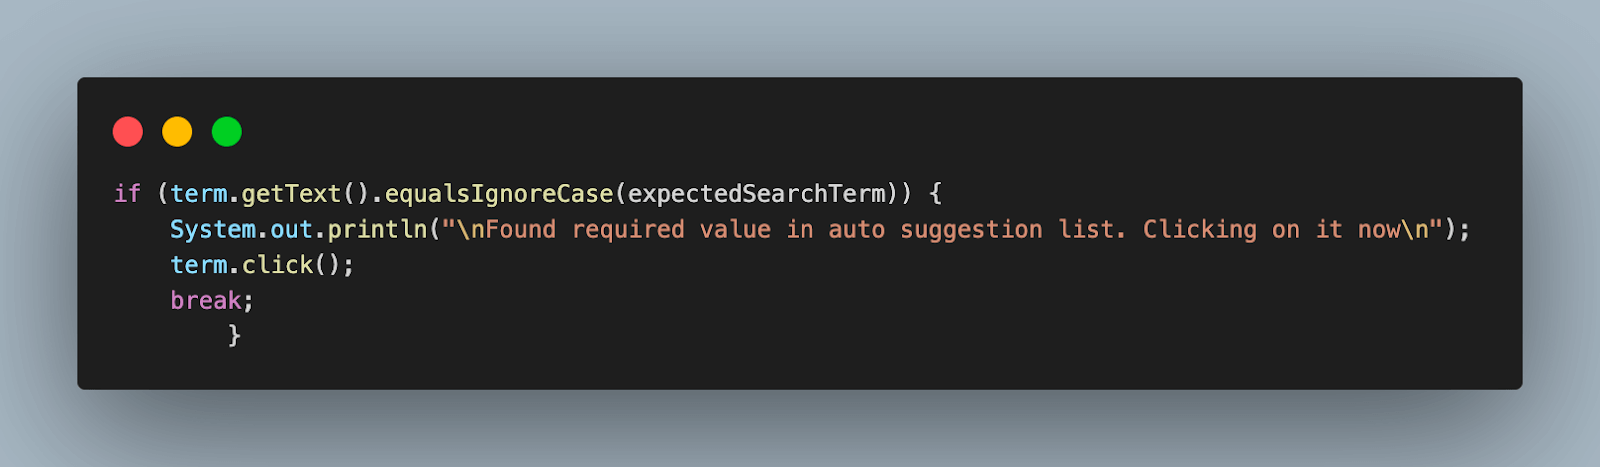 auto-suggestion value with the expected product